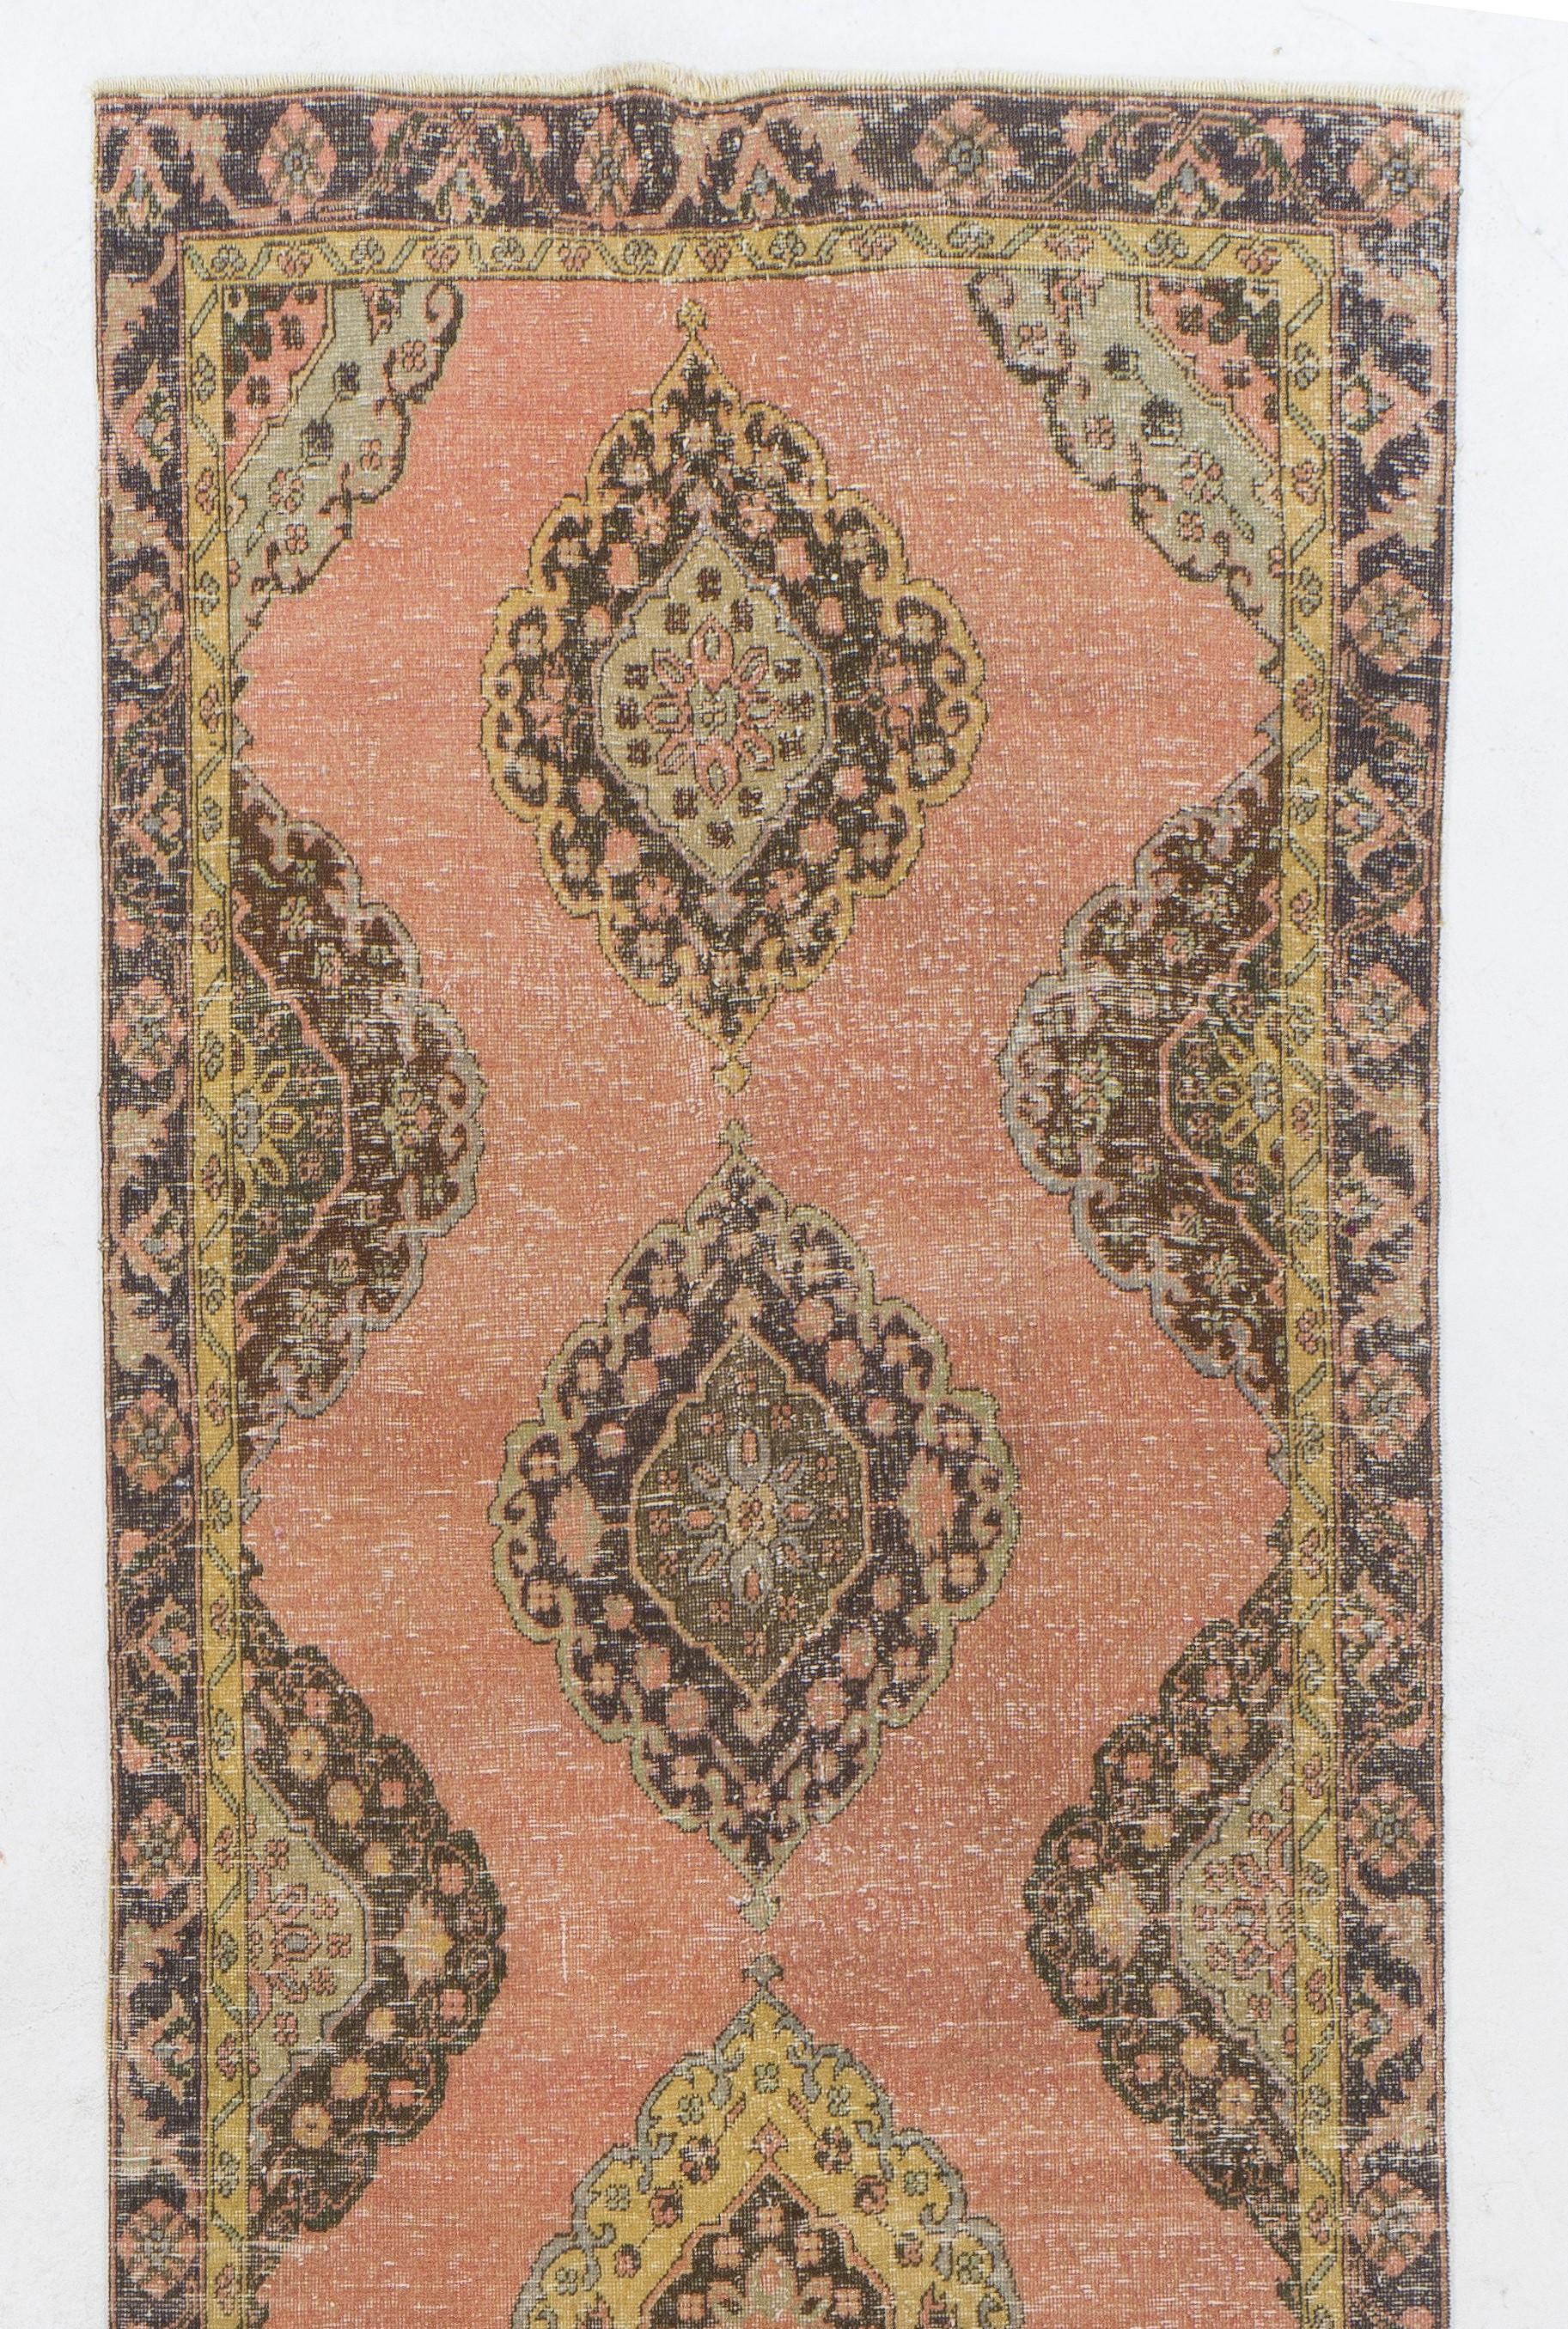 A vintage runner rug from Turkey. It is made of medium wool pile on wool foundation and features multiple medallion design. It has been washed professionally, the rug is sturdy and can be used in both residential or commercial interiors. 
Size: 4.3